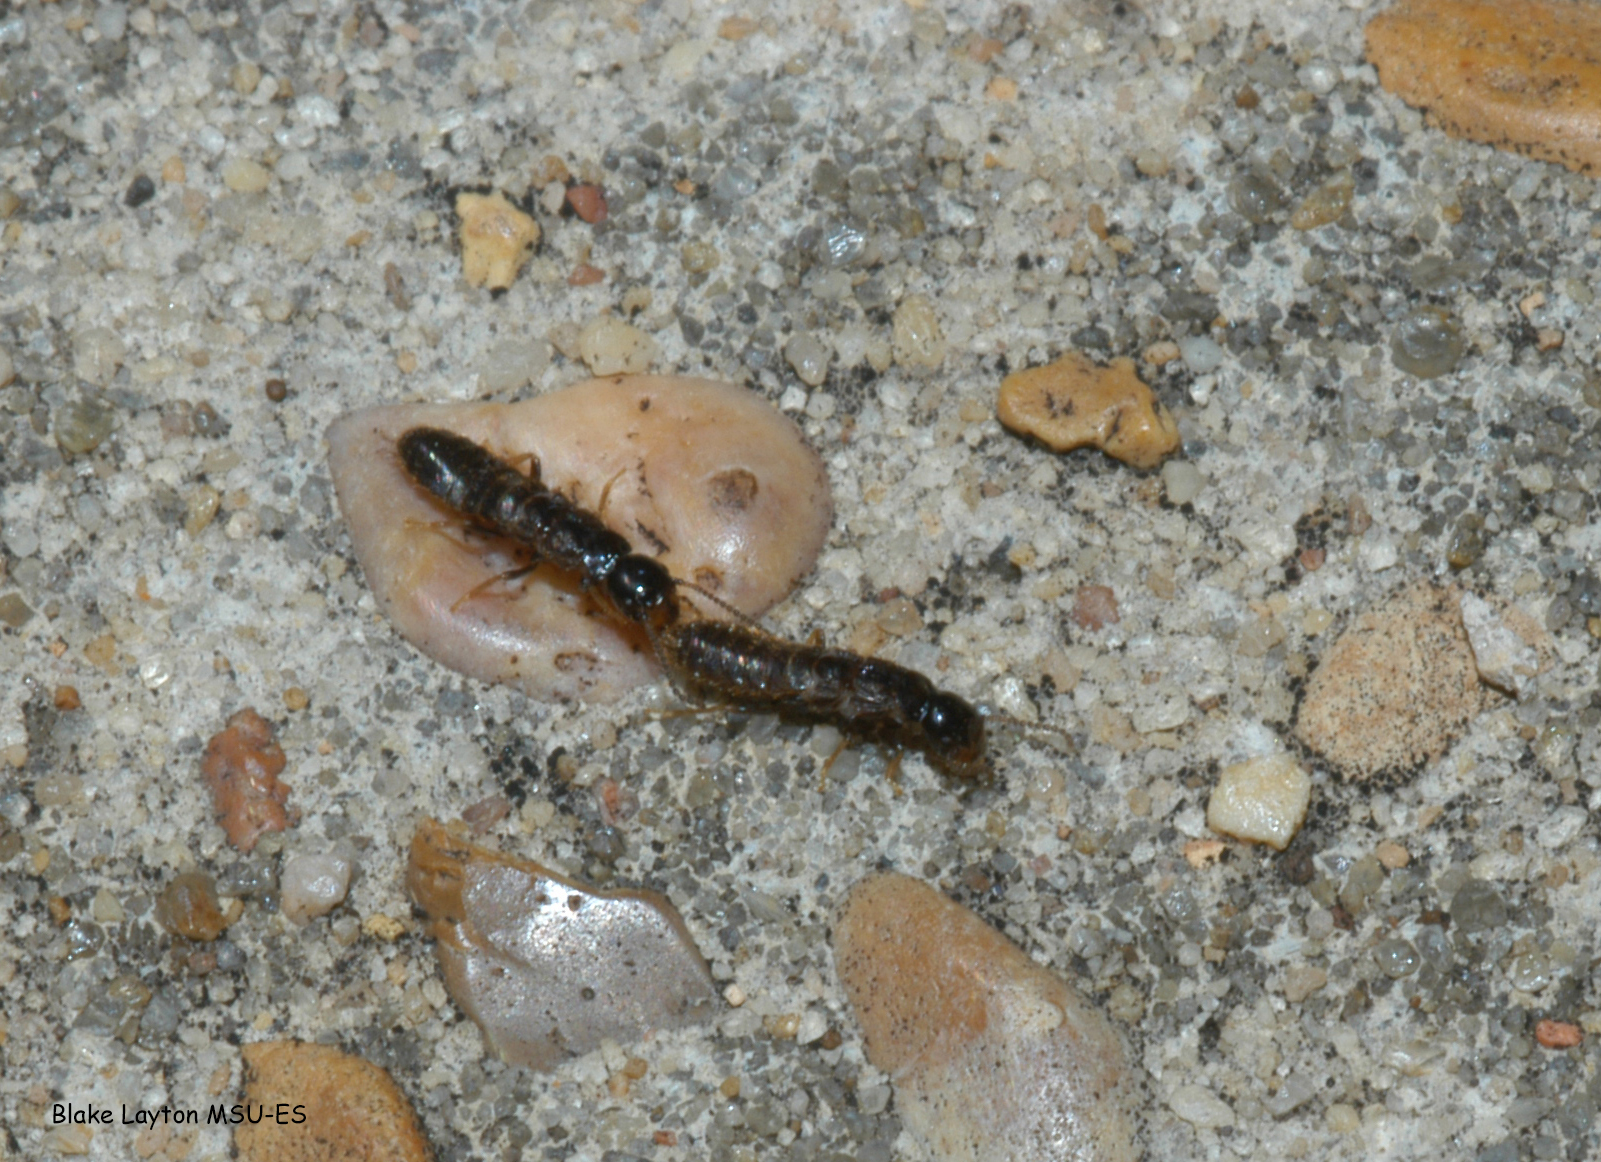 Eastern subterranean termite swarmers after shedding wings.  Note the broad waist and the straight, beadlike antennae.